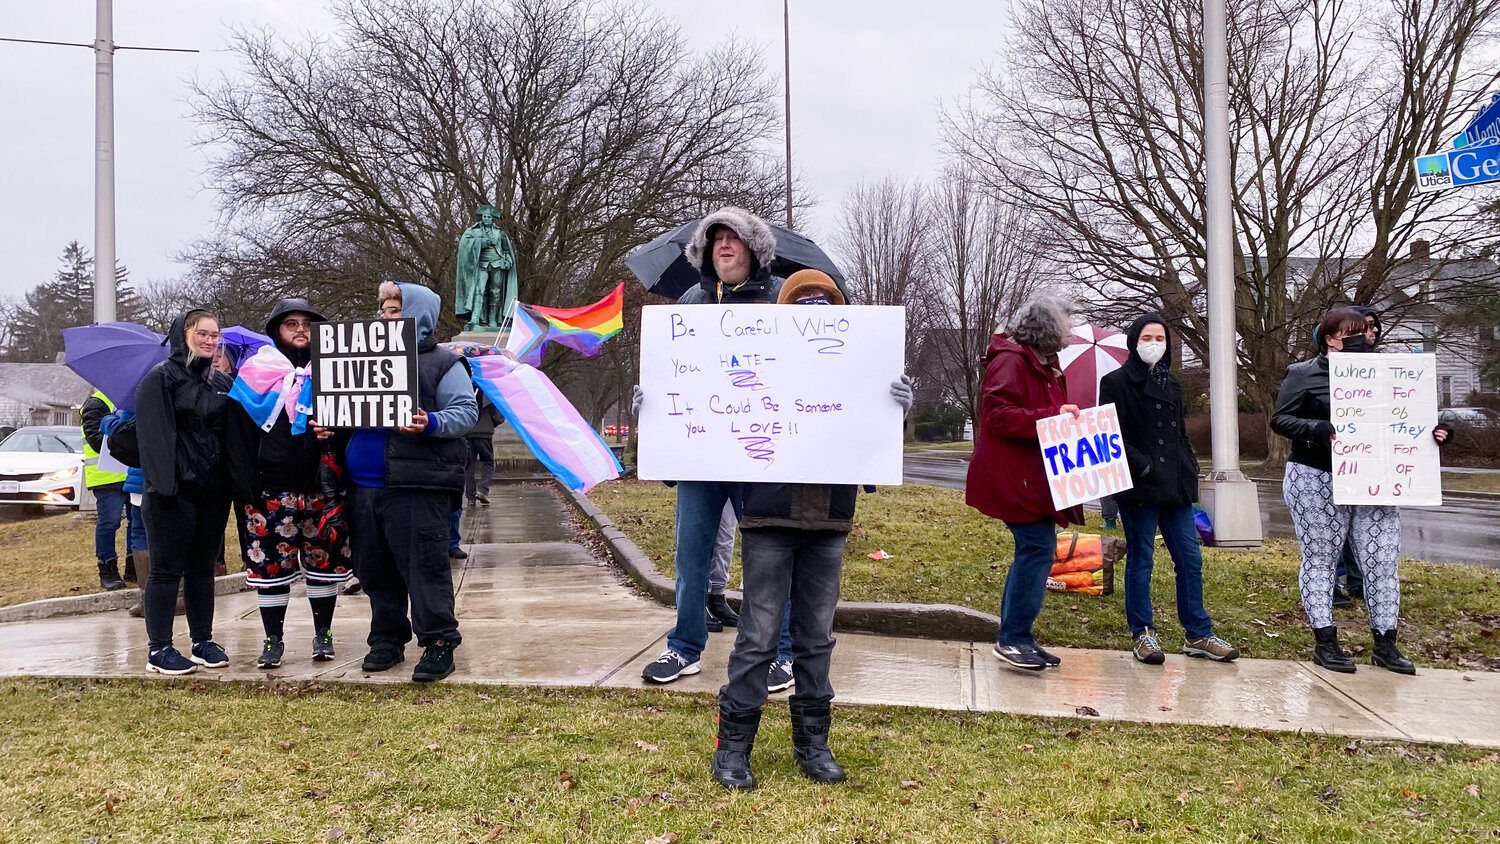 Signs of support for trans people and the LGBTQ+ community flooded the intersection of Genesee Street and Memorial Parkway in Utica on Friday, March 31 during the International Transgender Day of Visibility.